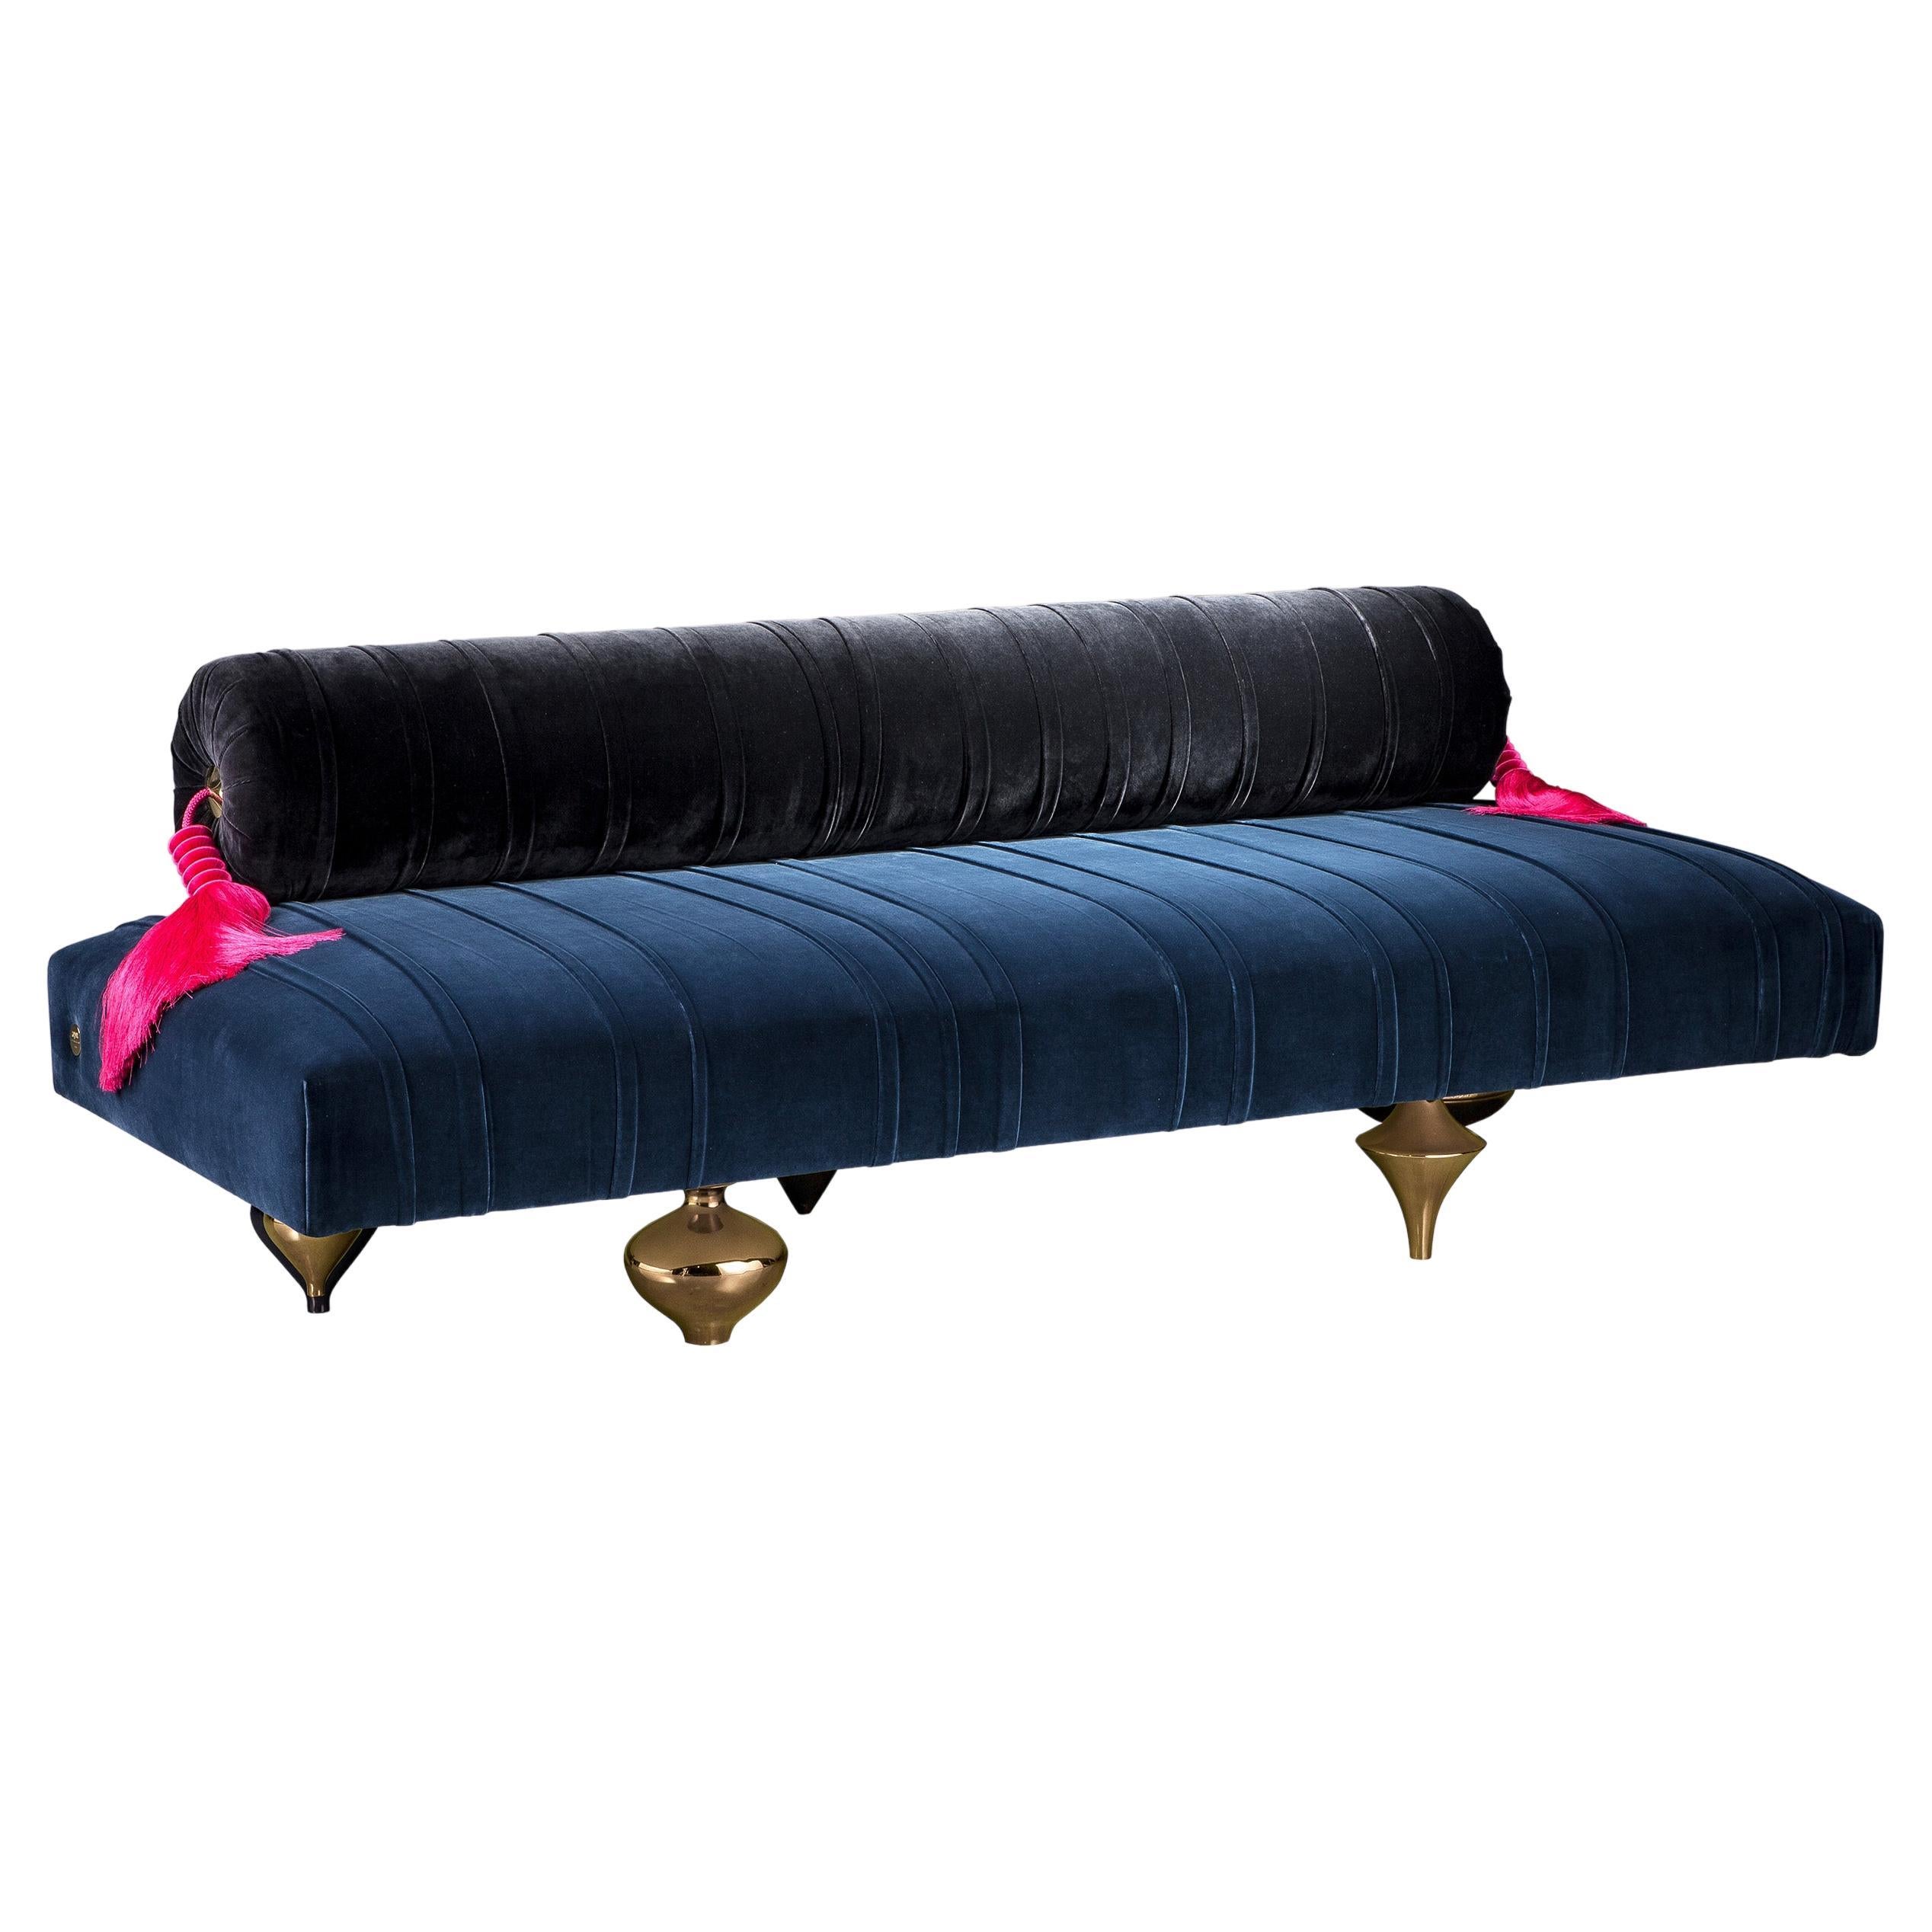 "Il Pezzo 1 Daybed" upholstered ottoman in velvet with polished brass base For Sale